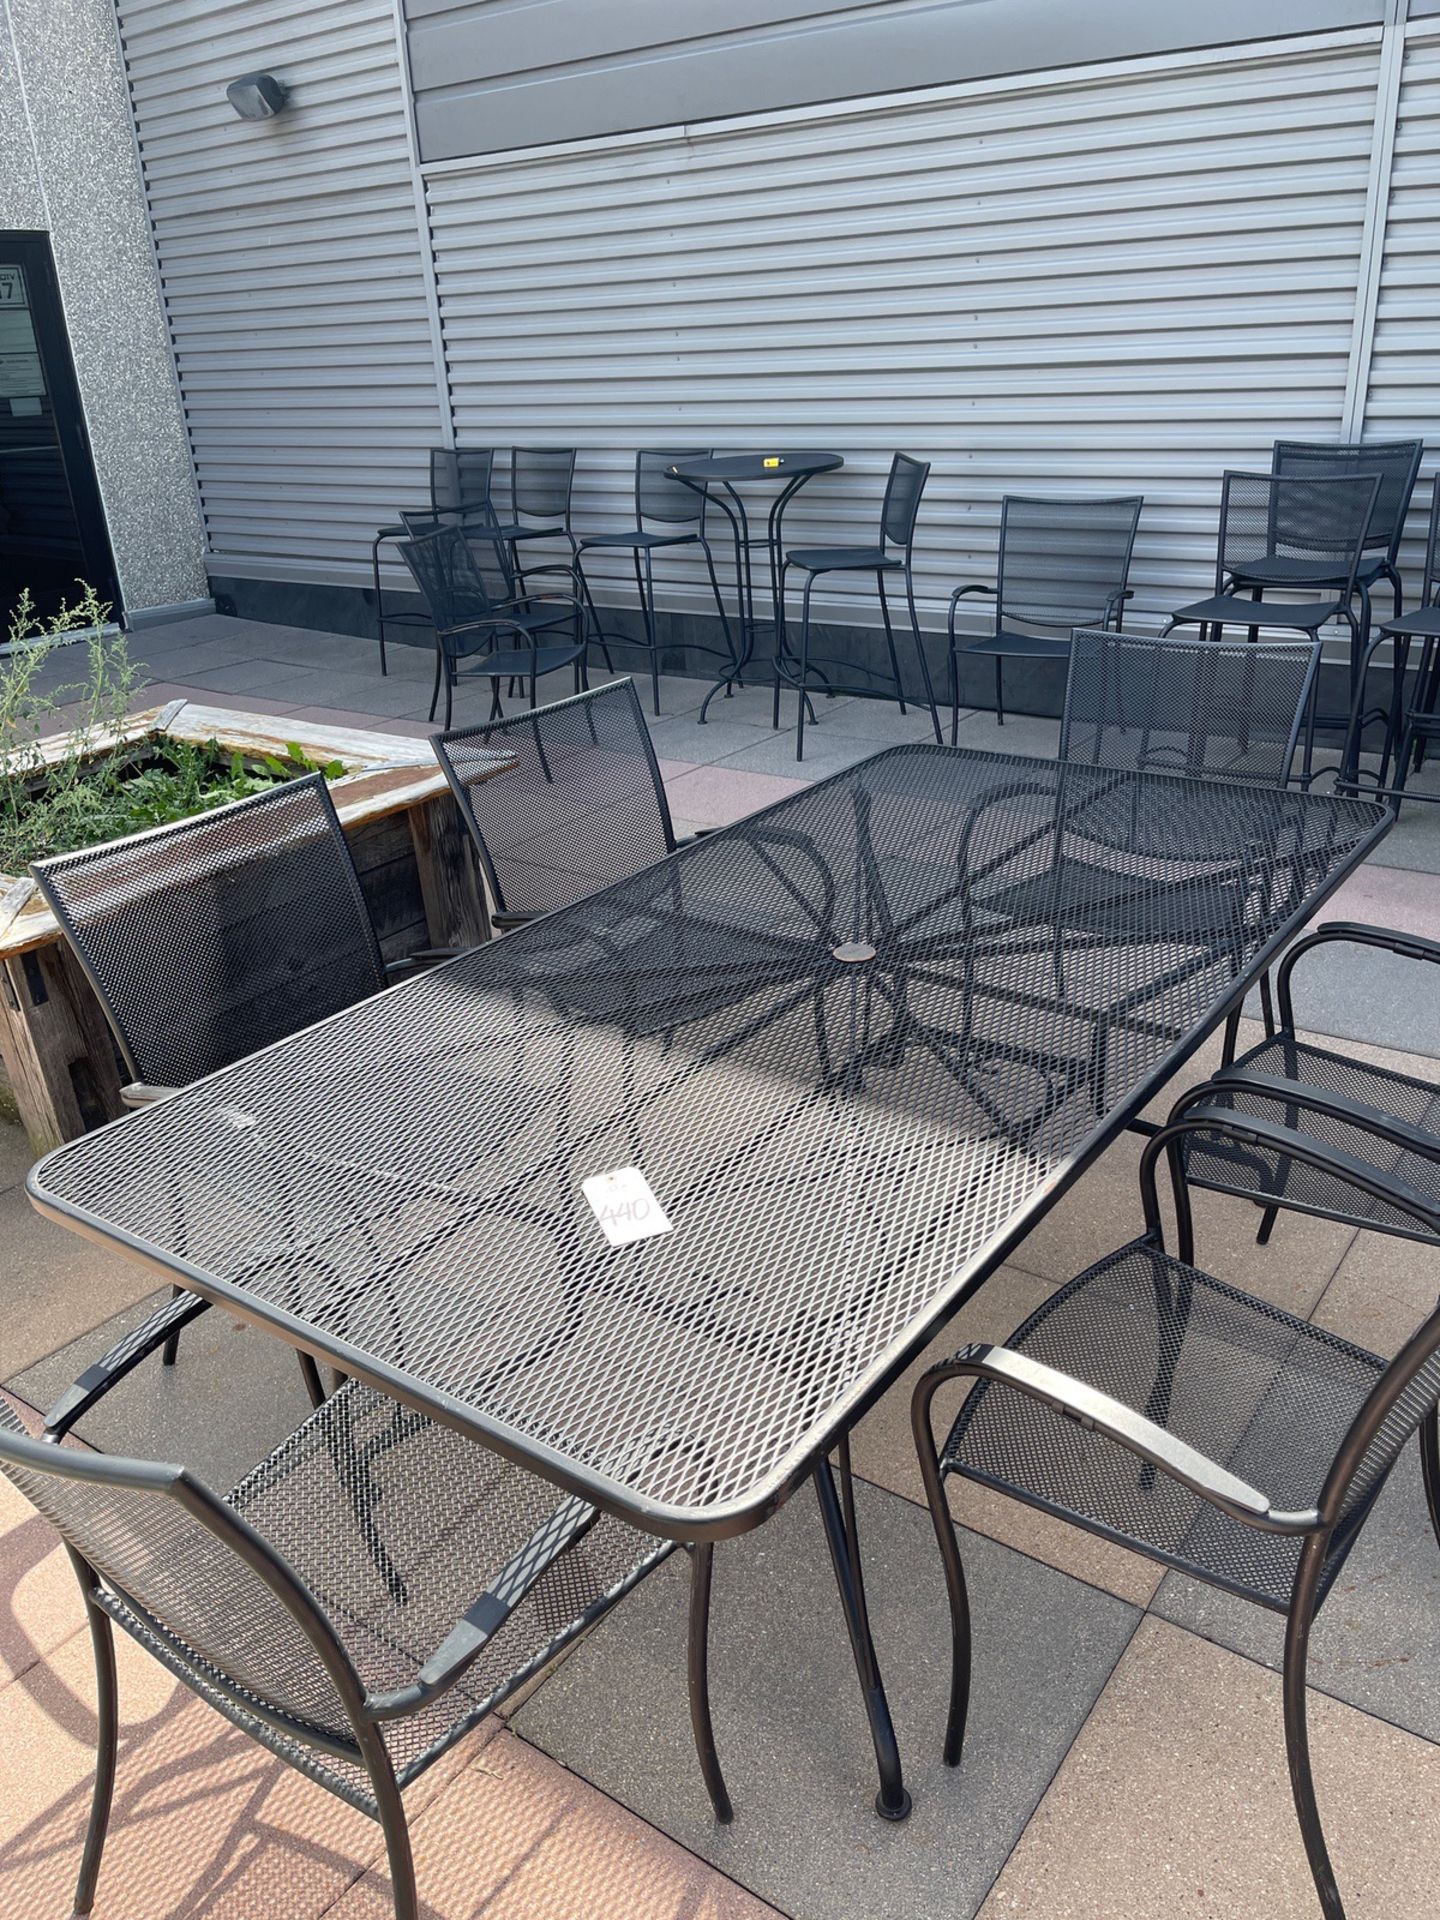 (1) 12 Top Black Wire Patio Table with (12) Black Wire Patio Chairs, Table Approx. | Rig Fee $150